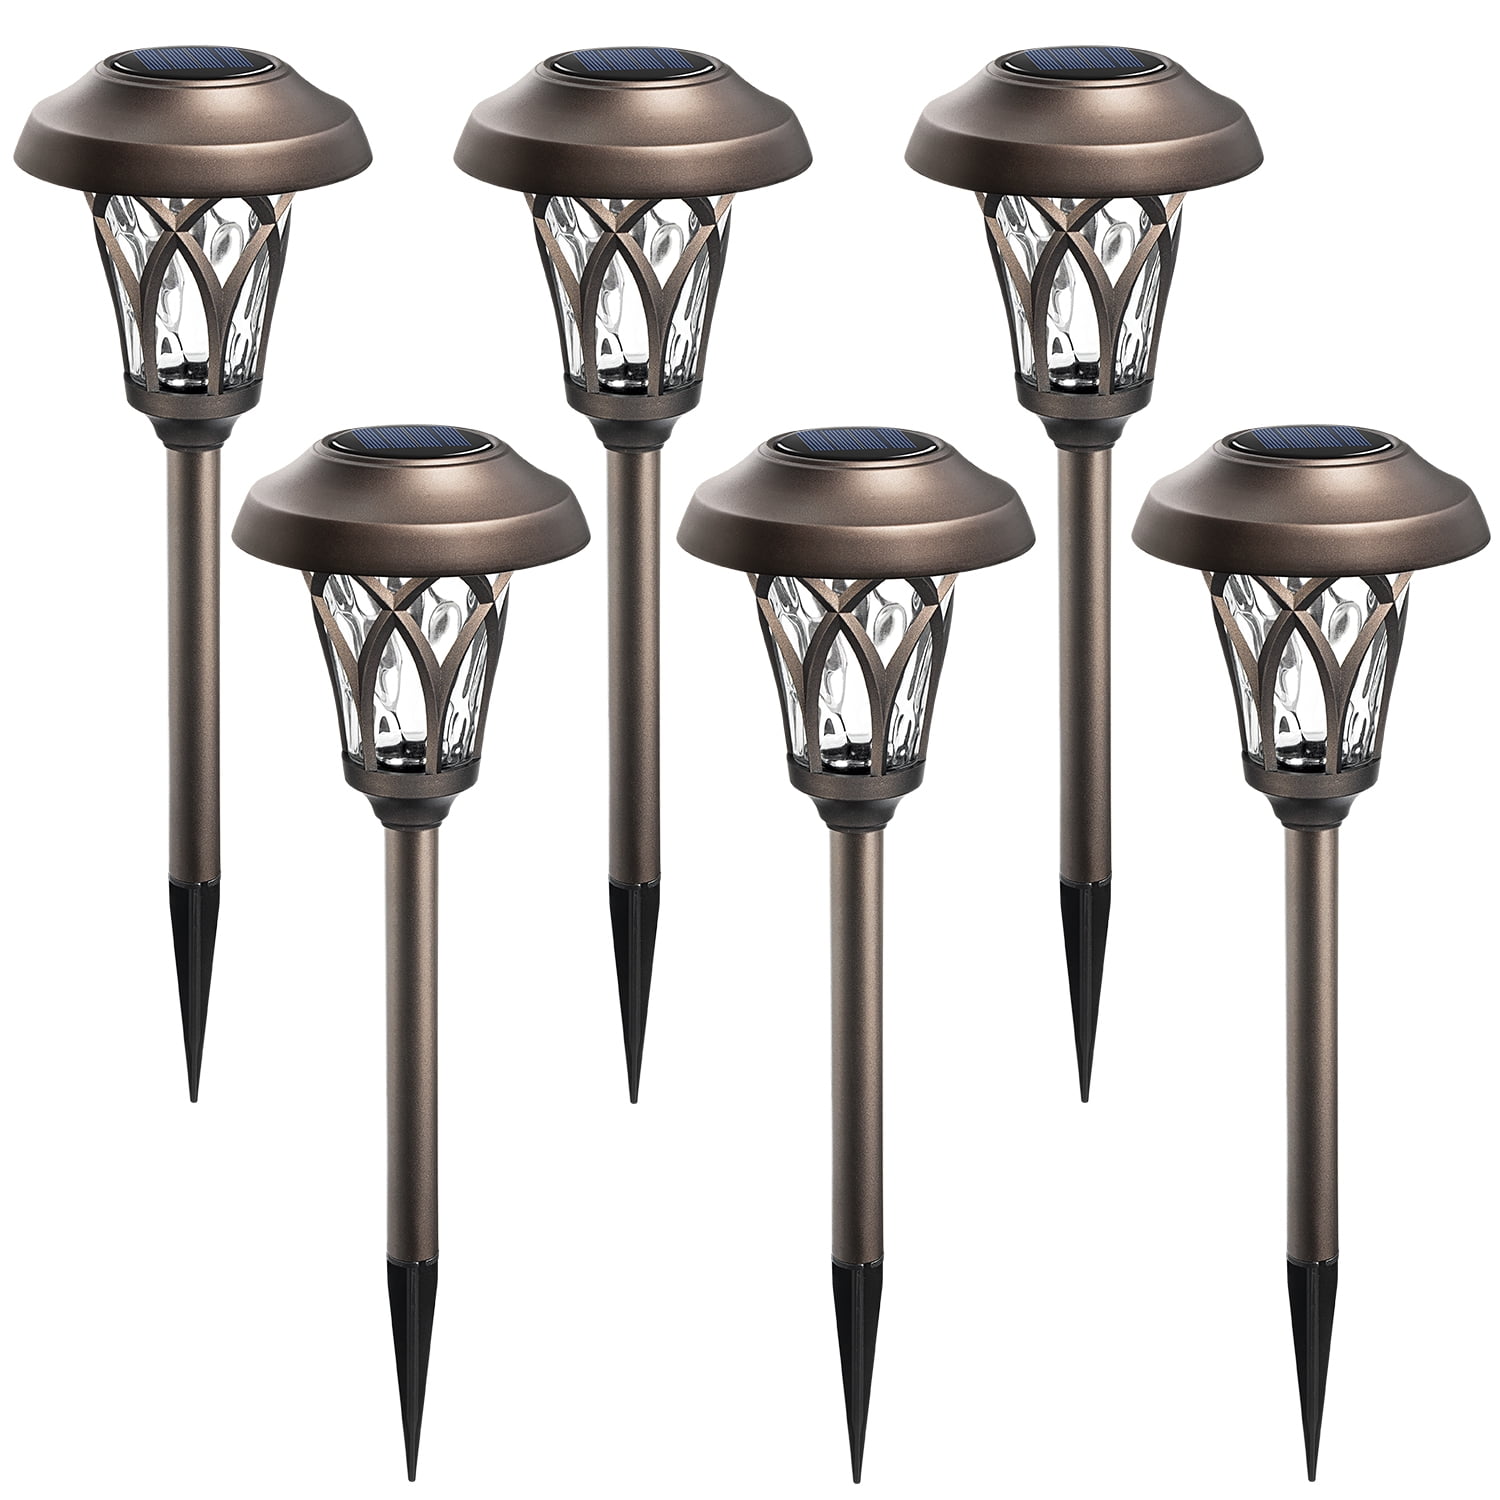 Kingfisher Solar Powered LED Self Charging Fence Post Lights for Garden & Patio 